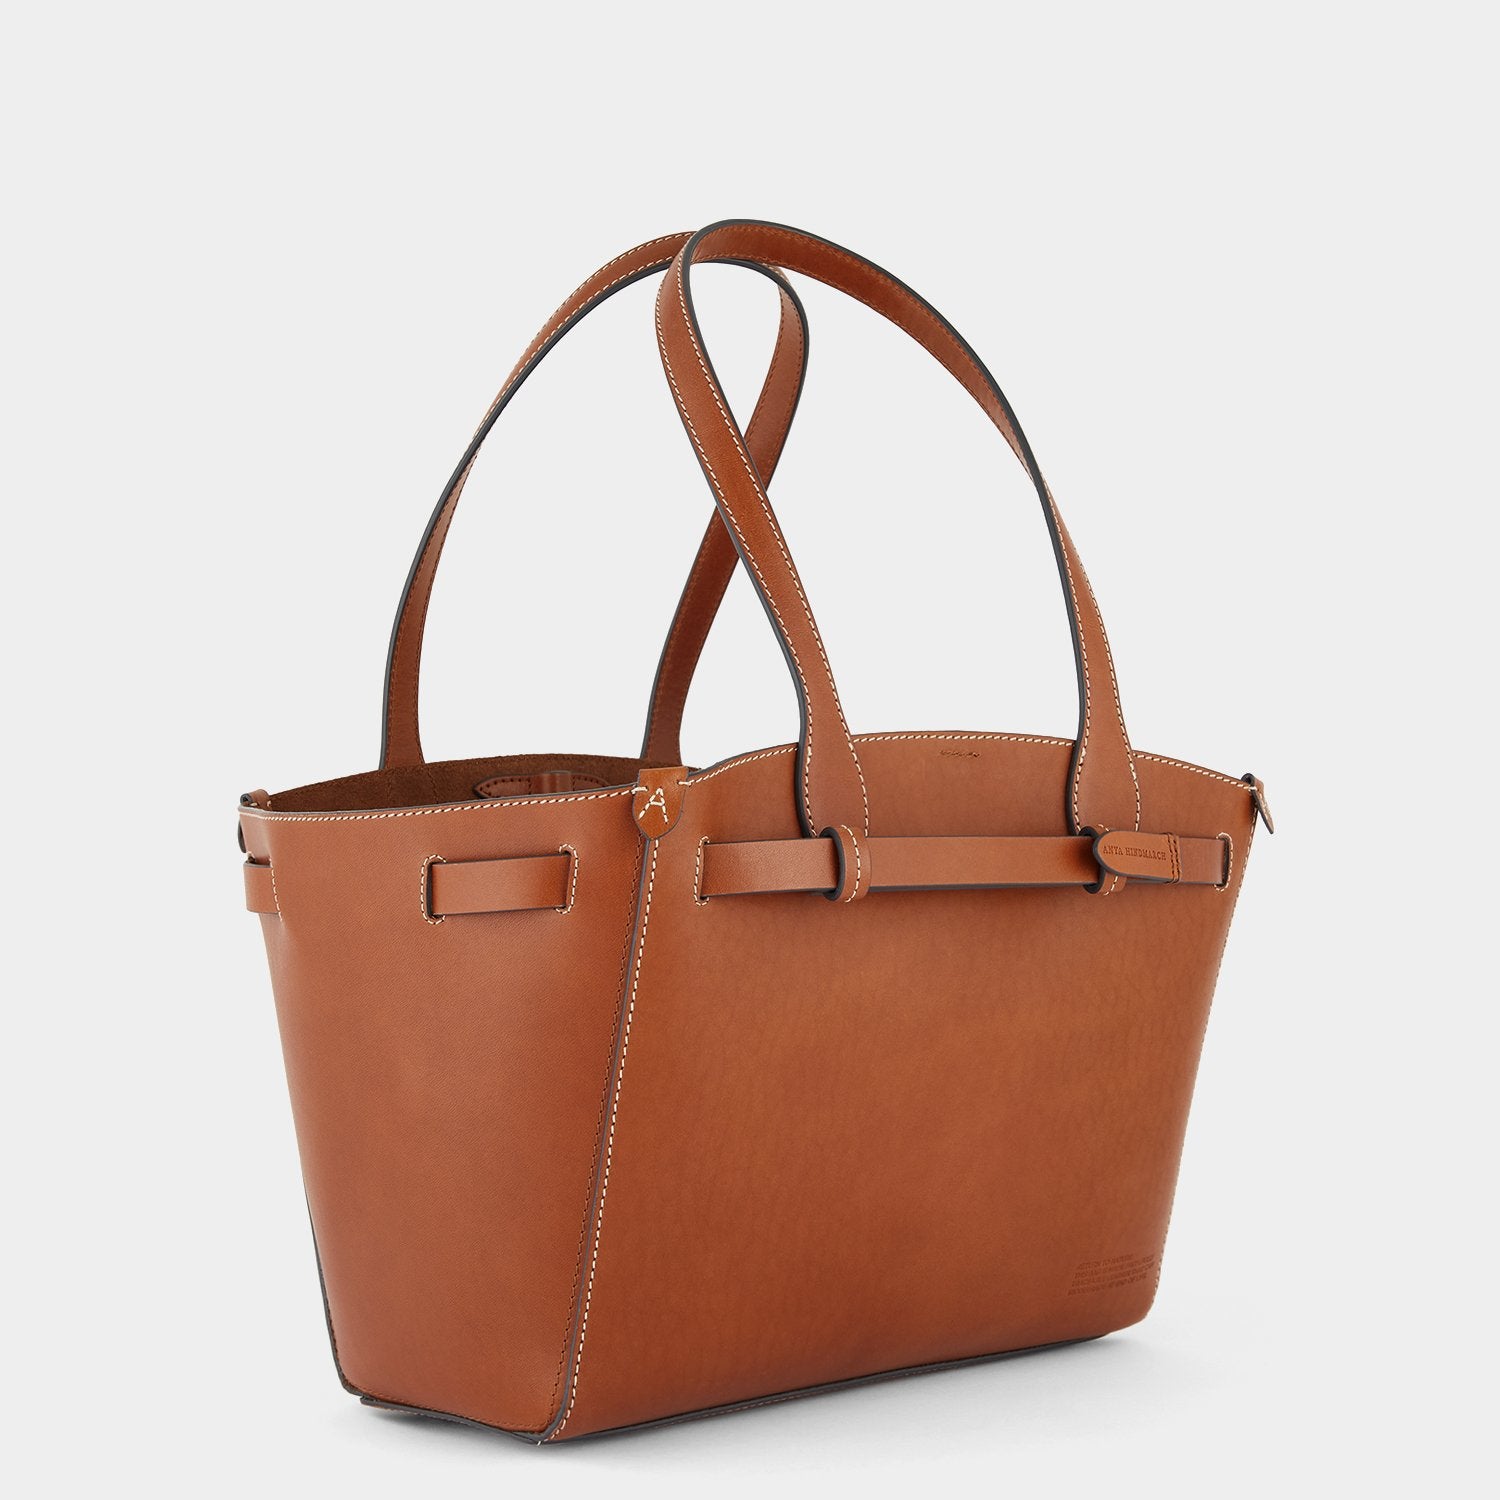 「Return to Nature」 トート スモール -

                  
                    Compostable Leather in Tan -
                  

                  Anya Hindmarch JP
